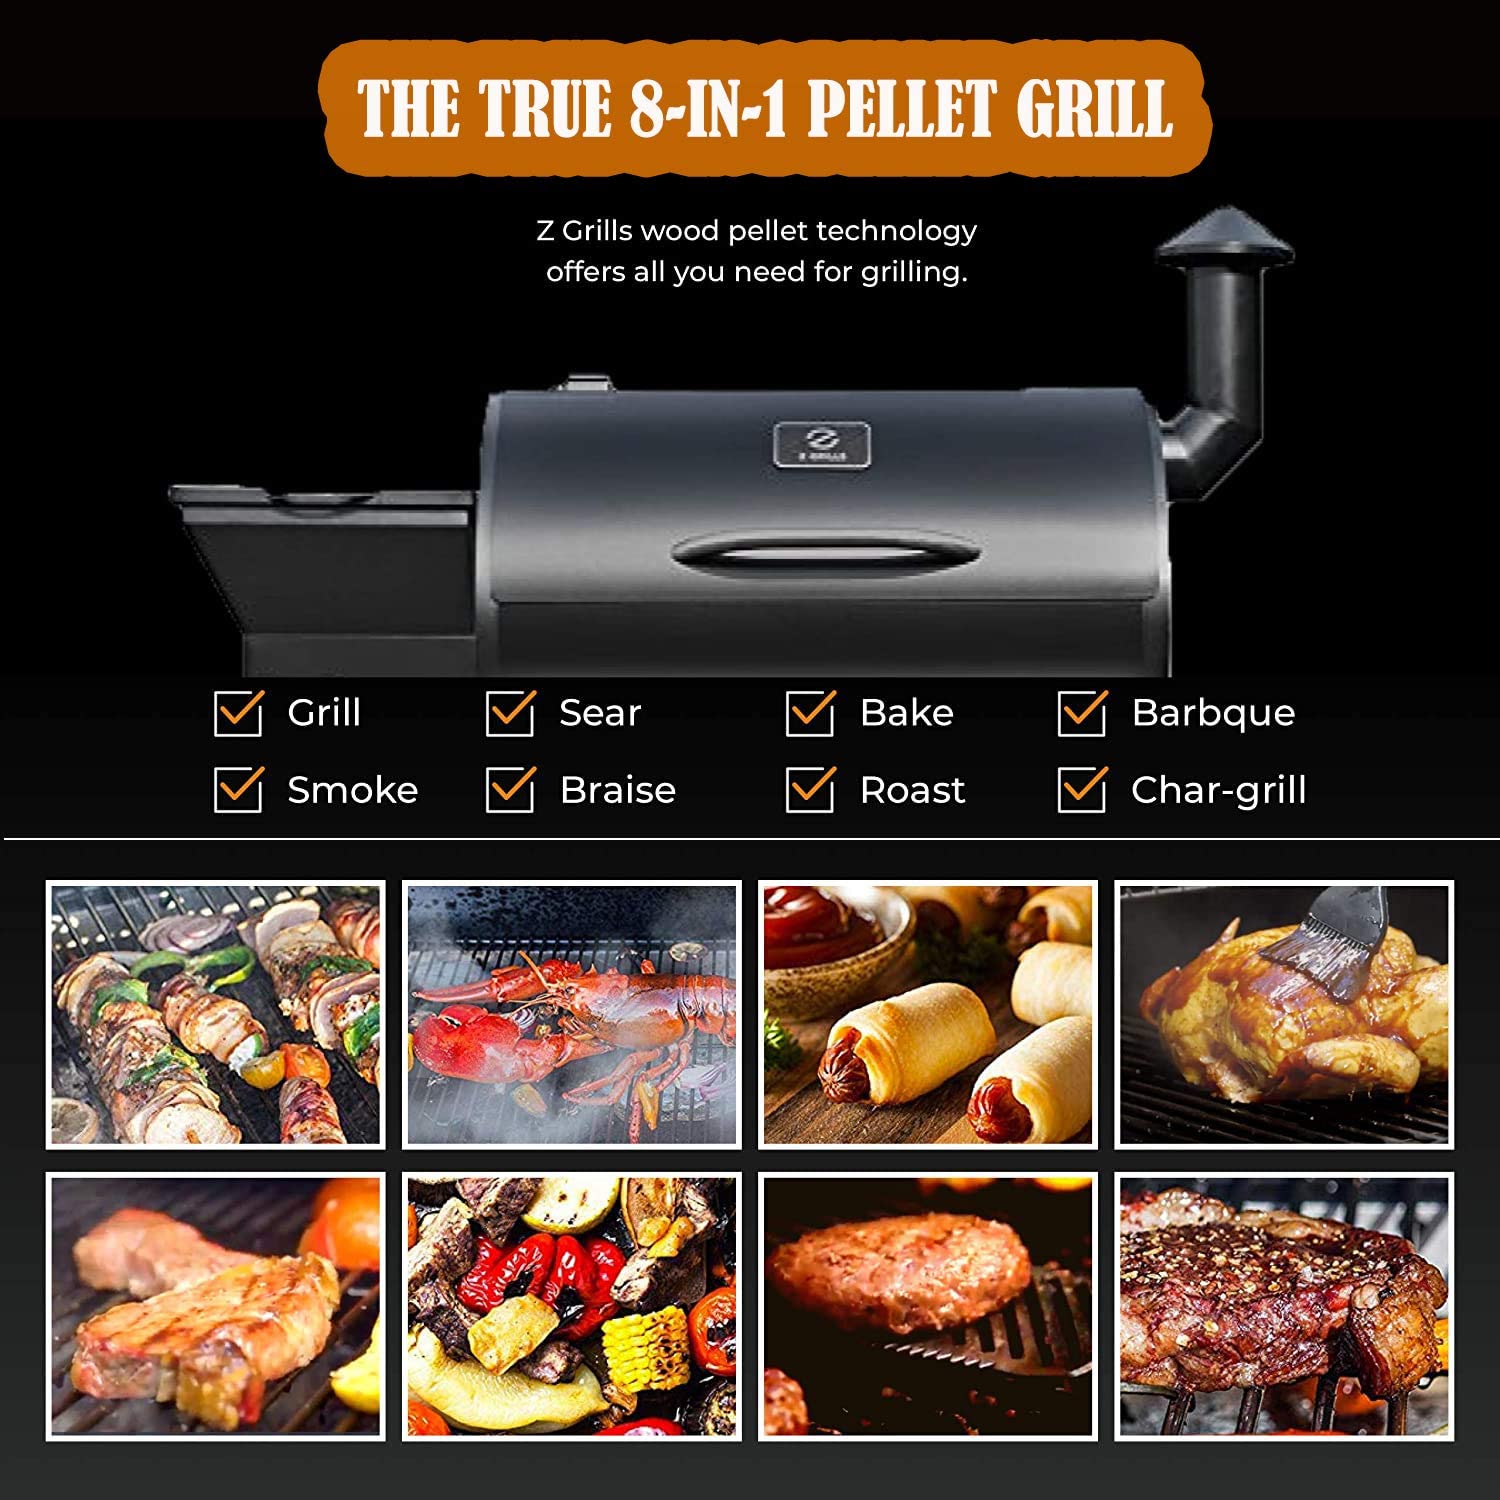 Z Grills 700 sq in Wood Pellet Barbecue Grill and Smoker Family Size 8 in 1 Smart BBQ Grill - image 4 of 8